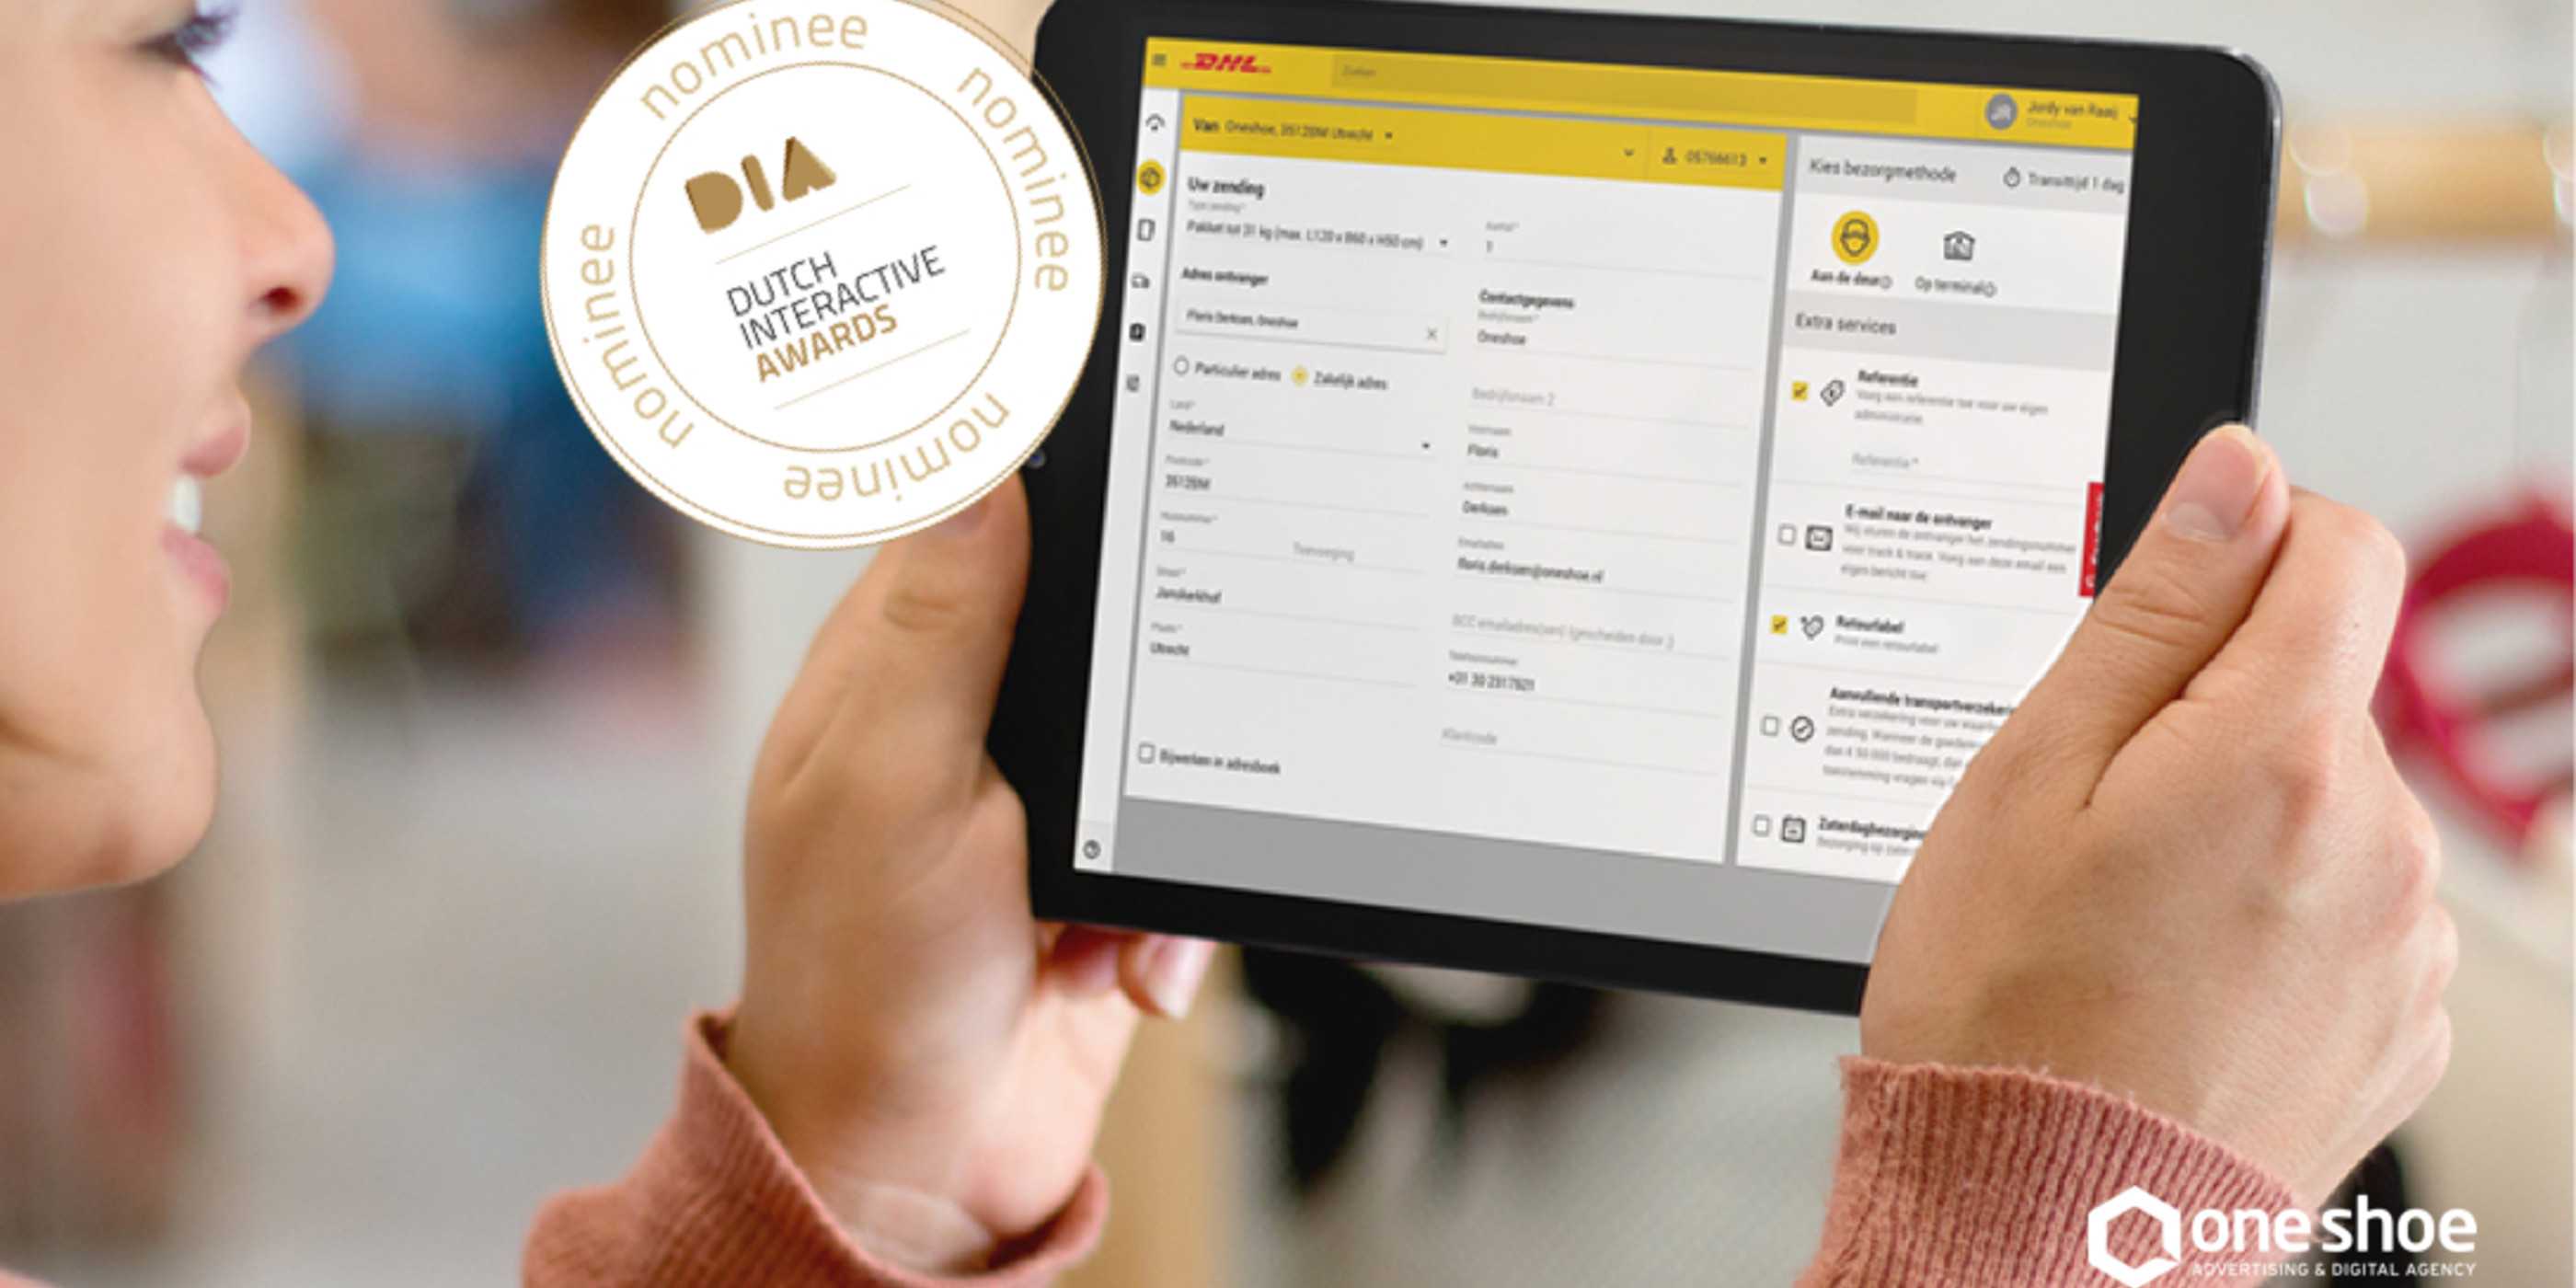 MyDHL Logo - My DHL Parcel nominated for Dutch Interactive Award!